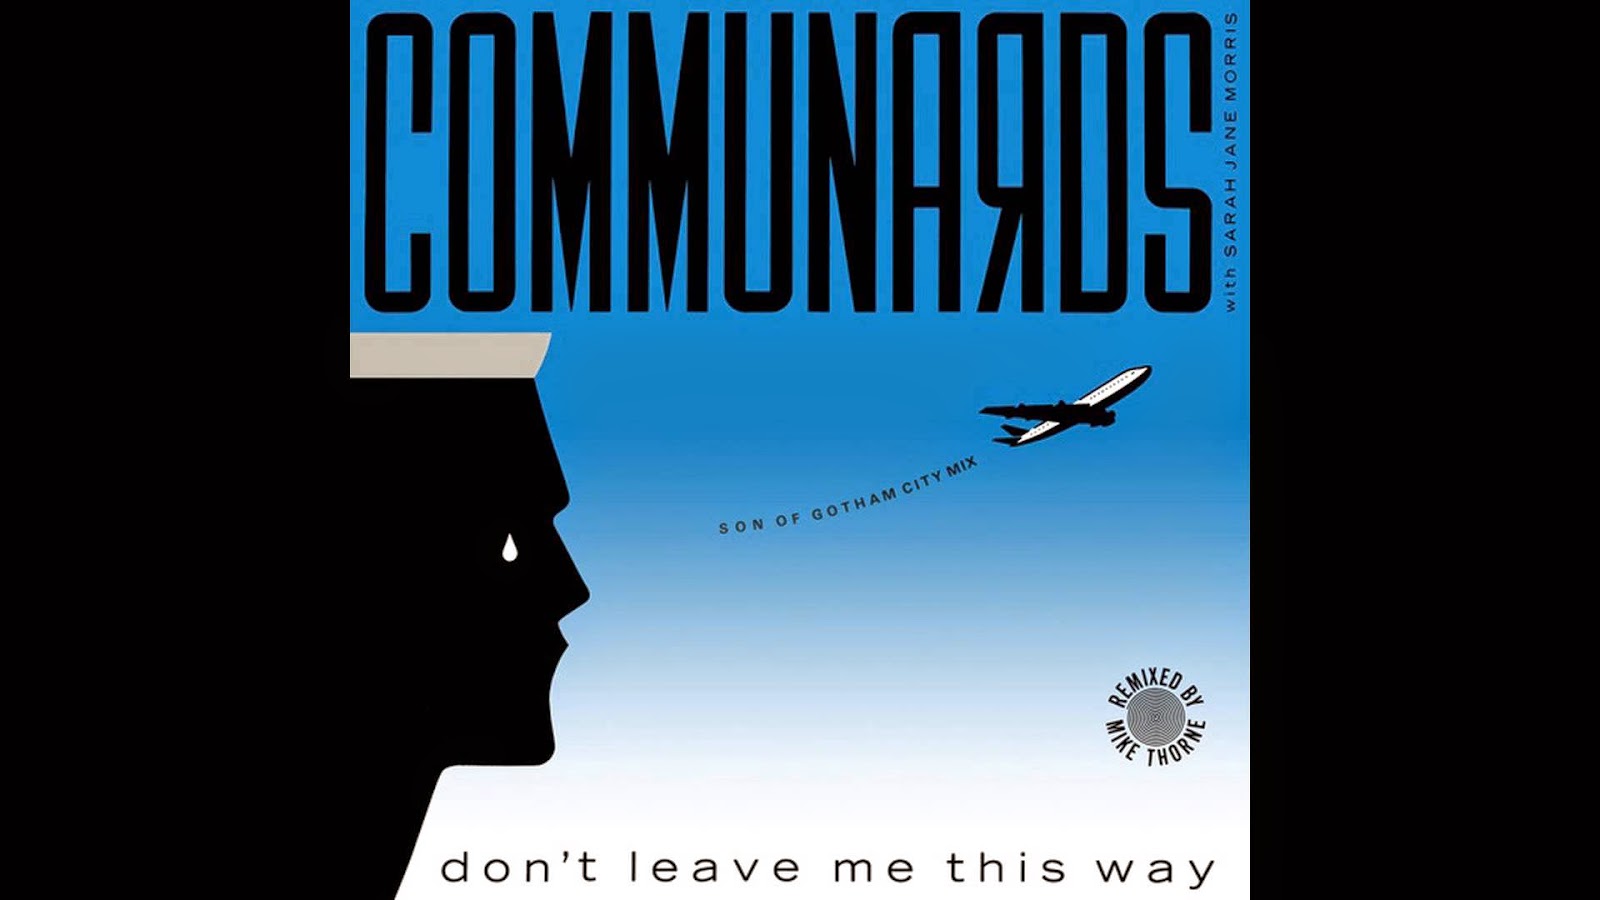 Live don t leave. The Communards. Don't leave me this way. Don't leave me this way Klaas. Thelma Houston - don't leave me this way фото.